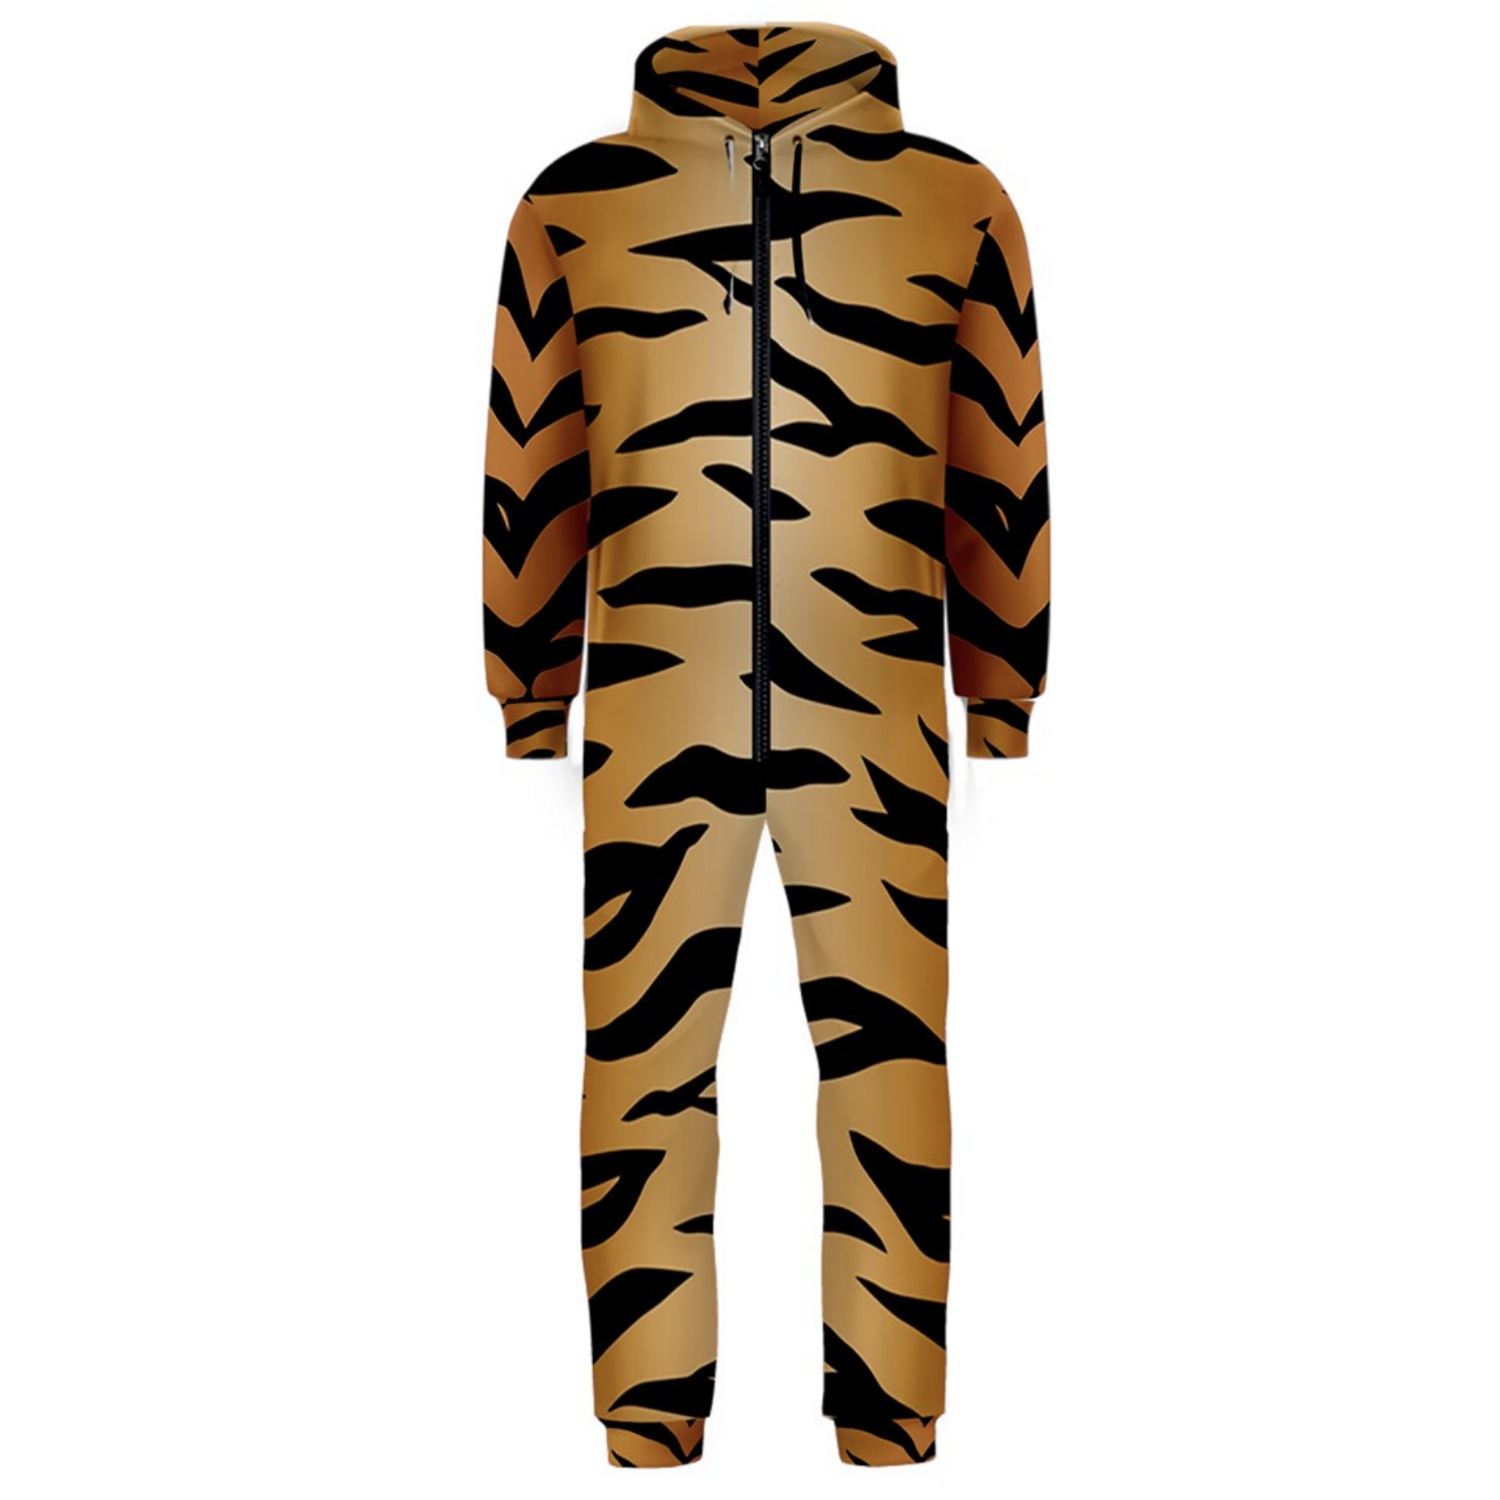 🤴🏽🐅 Classic Tiger print, Feline print, Animal's print, Hooded Onesie Jumpsuit For Men, 7 sizes XS to 3XL, tiger, cat, feline, animal, 7 sizes XS to 3XL, gift, gift for her